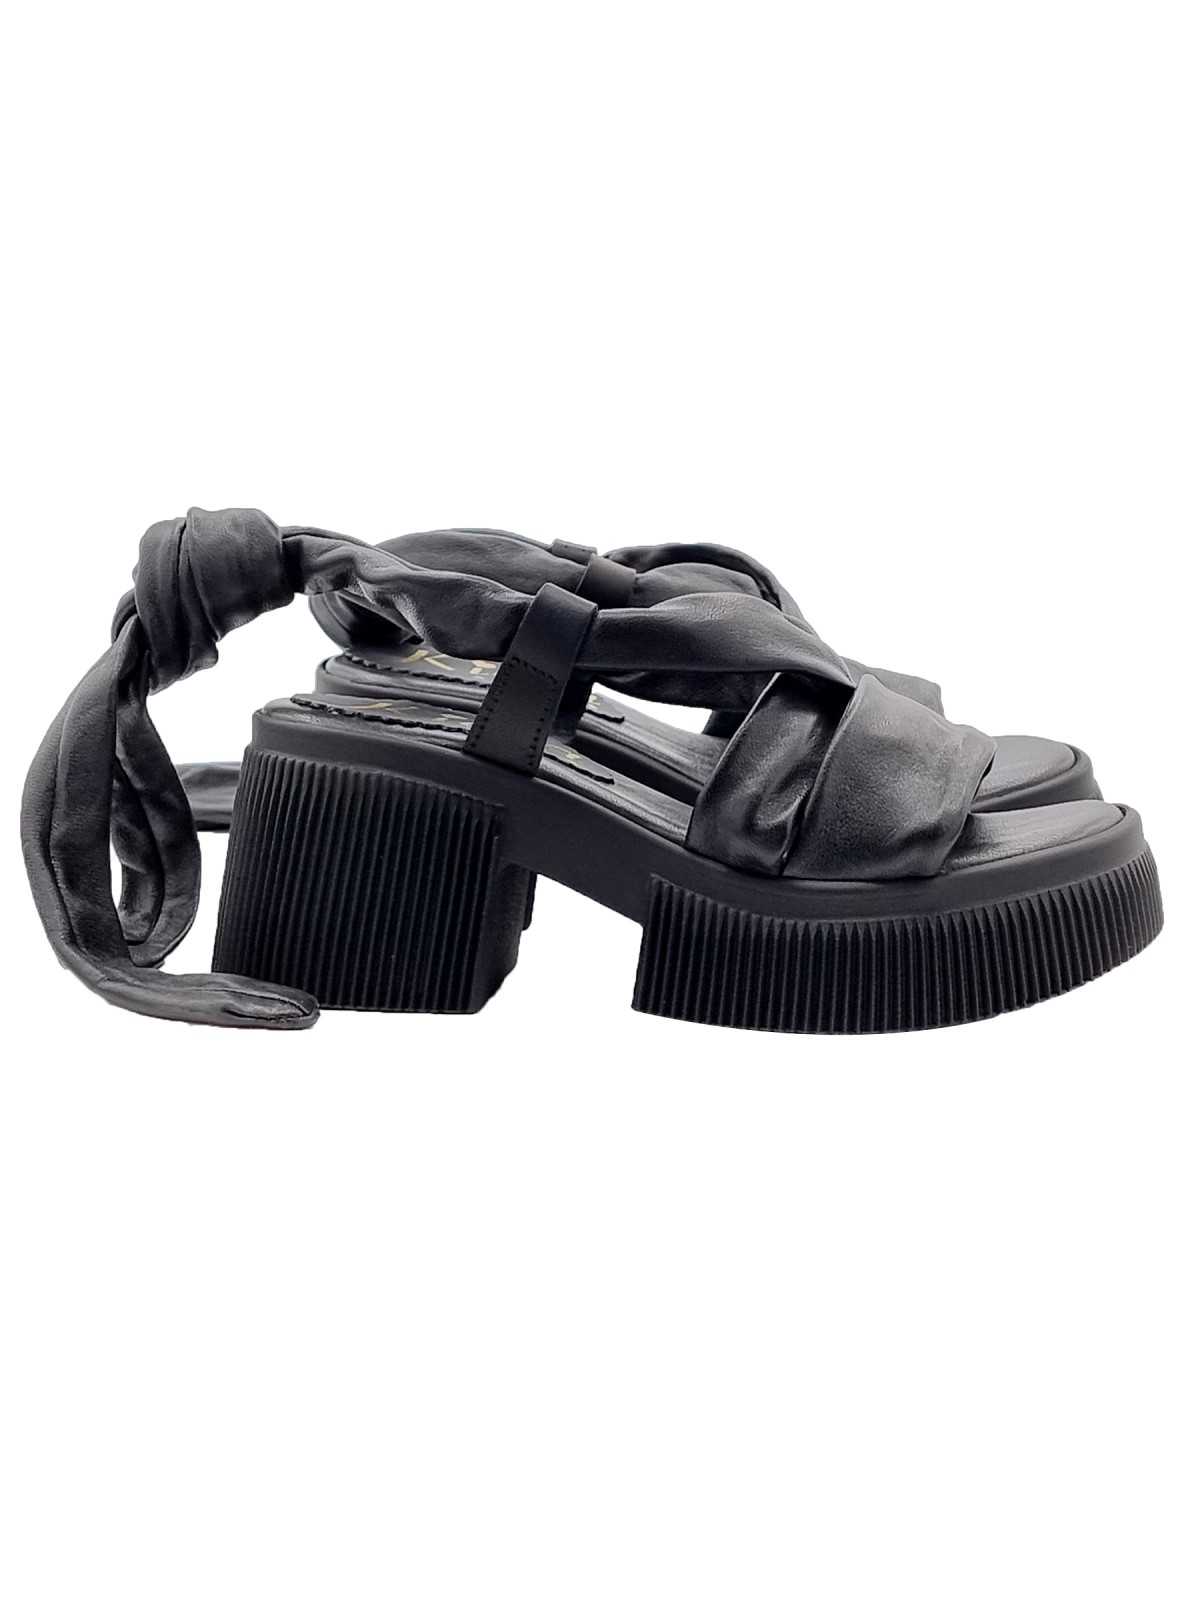 BLACK LEATHER CLOGS WITH LACES AND 7 CM HEEL